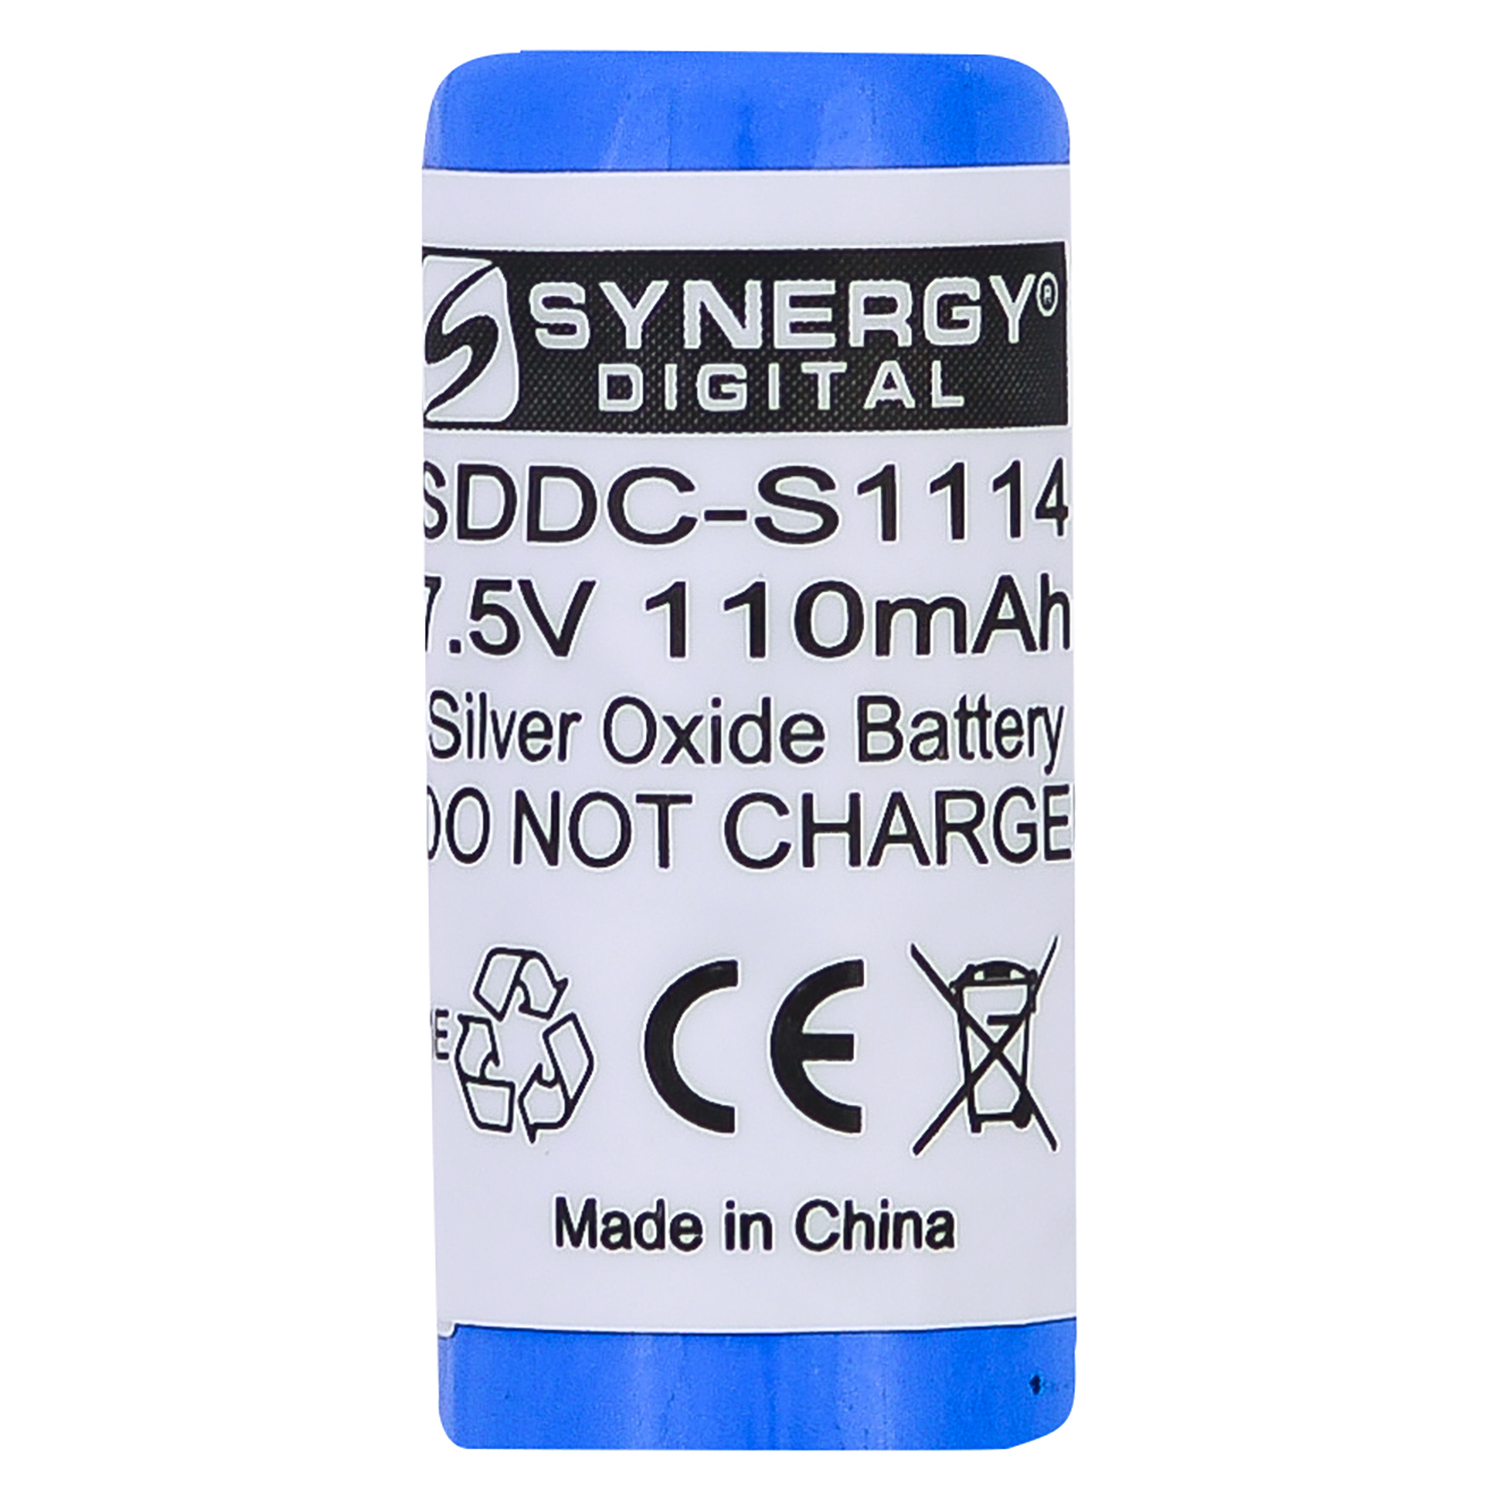 DogWatch DG-8000 Battery Replacement - Ultra High Capacity (Silver Oxide, 7.5V, 110 mAh) Battery